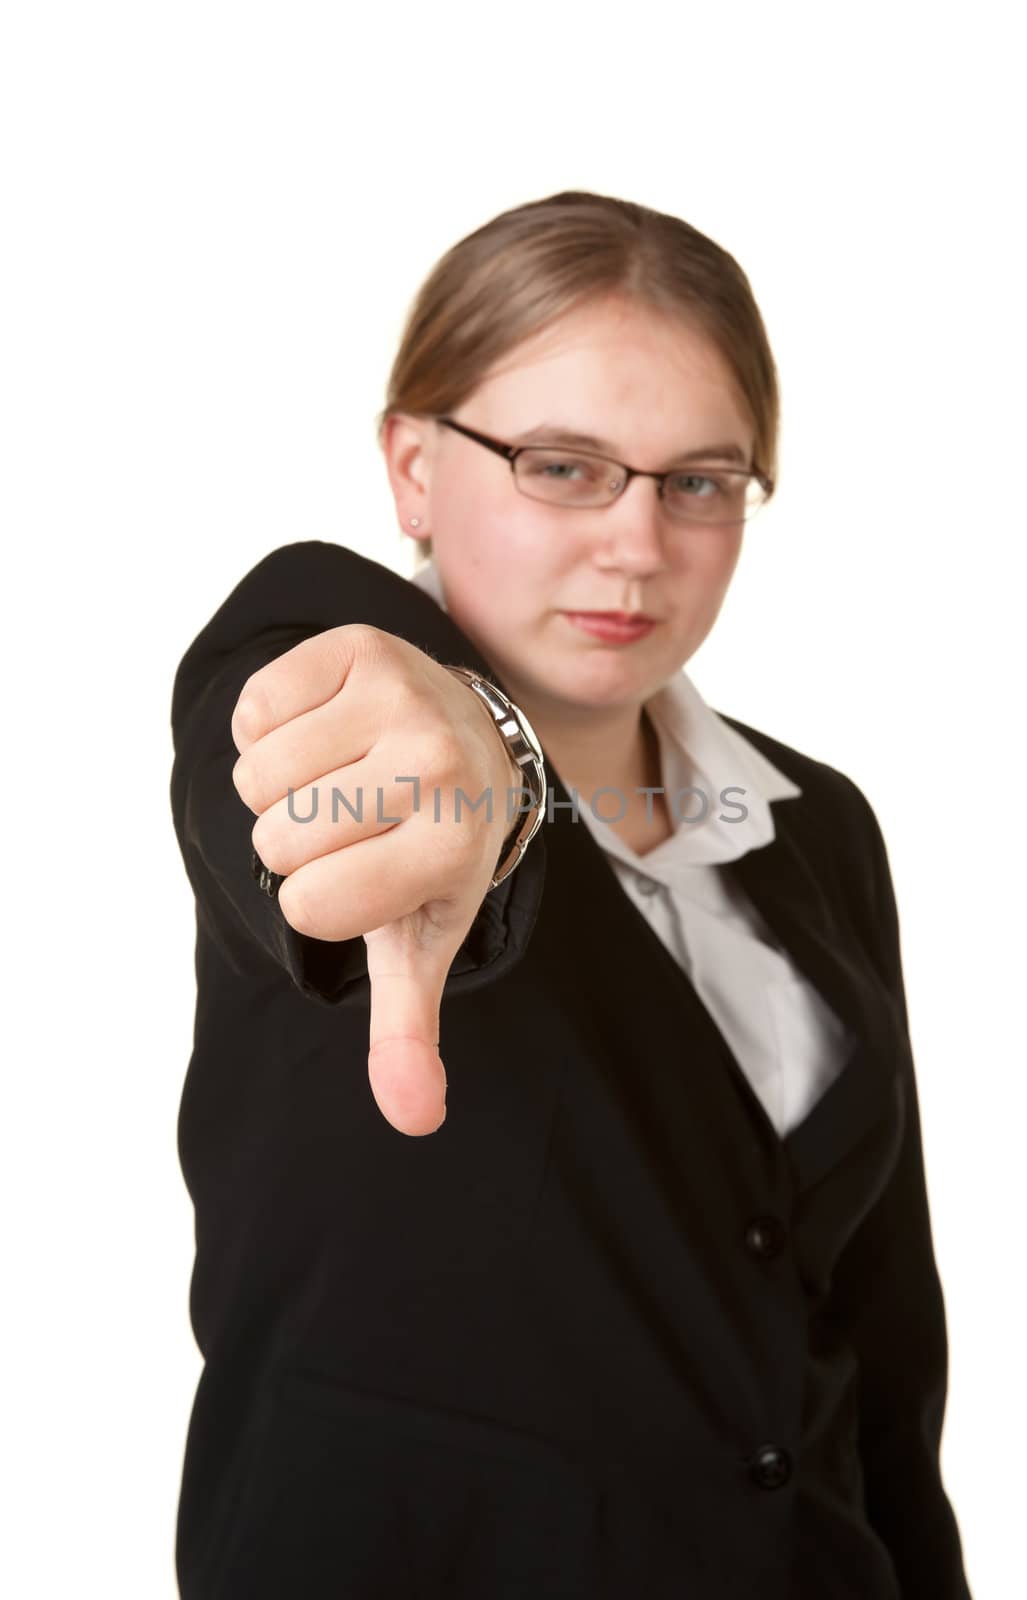 thumbs down from young business woman isolated on white background